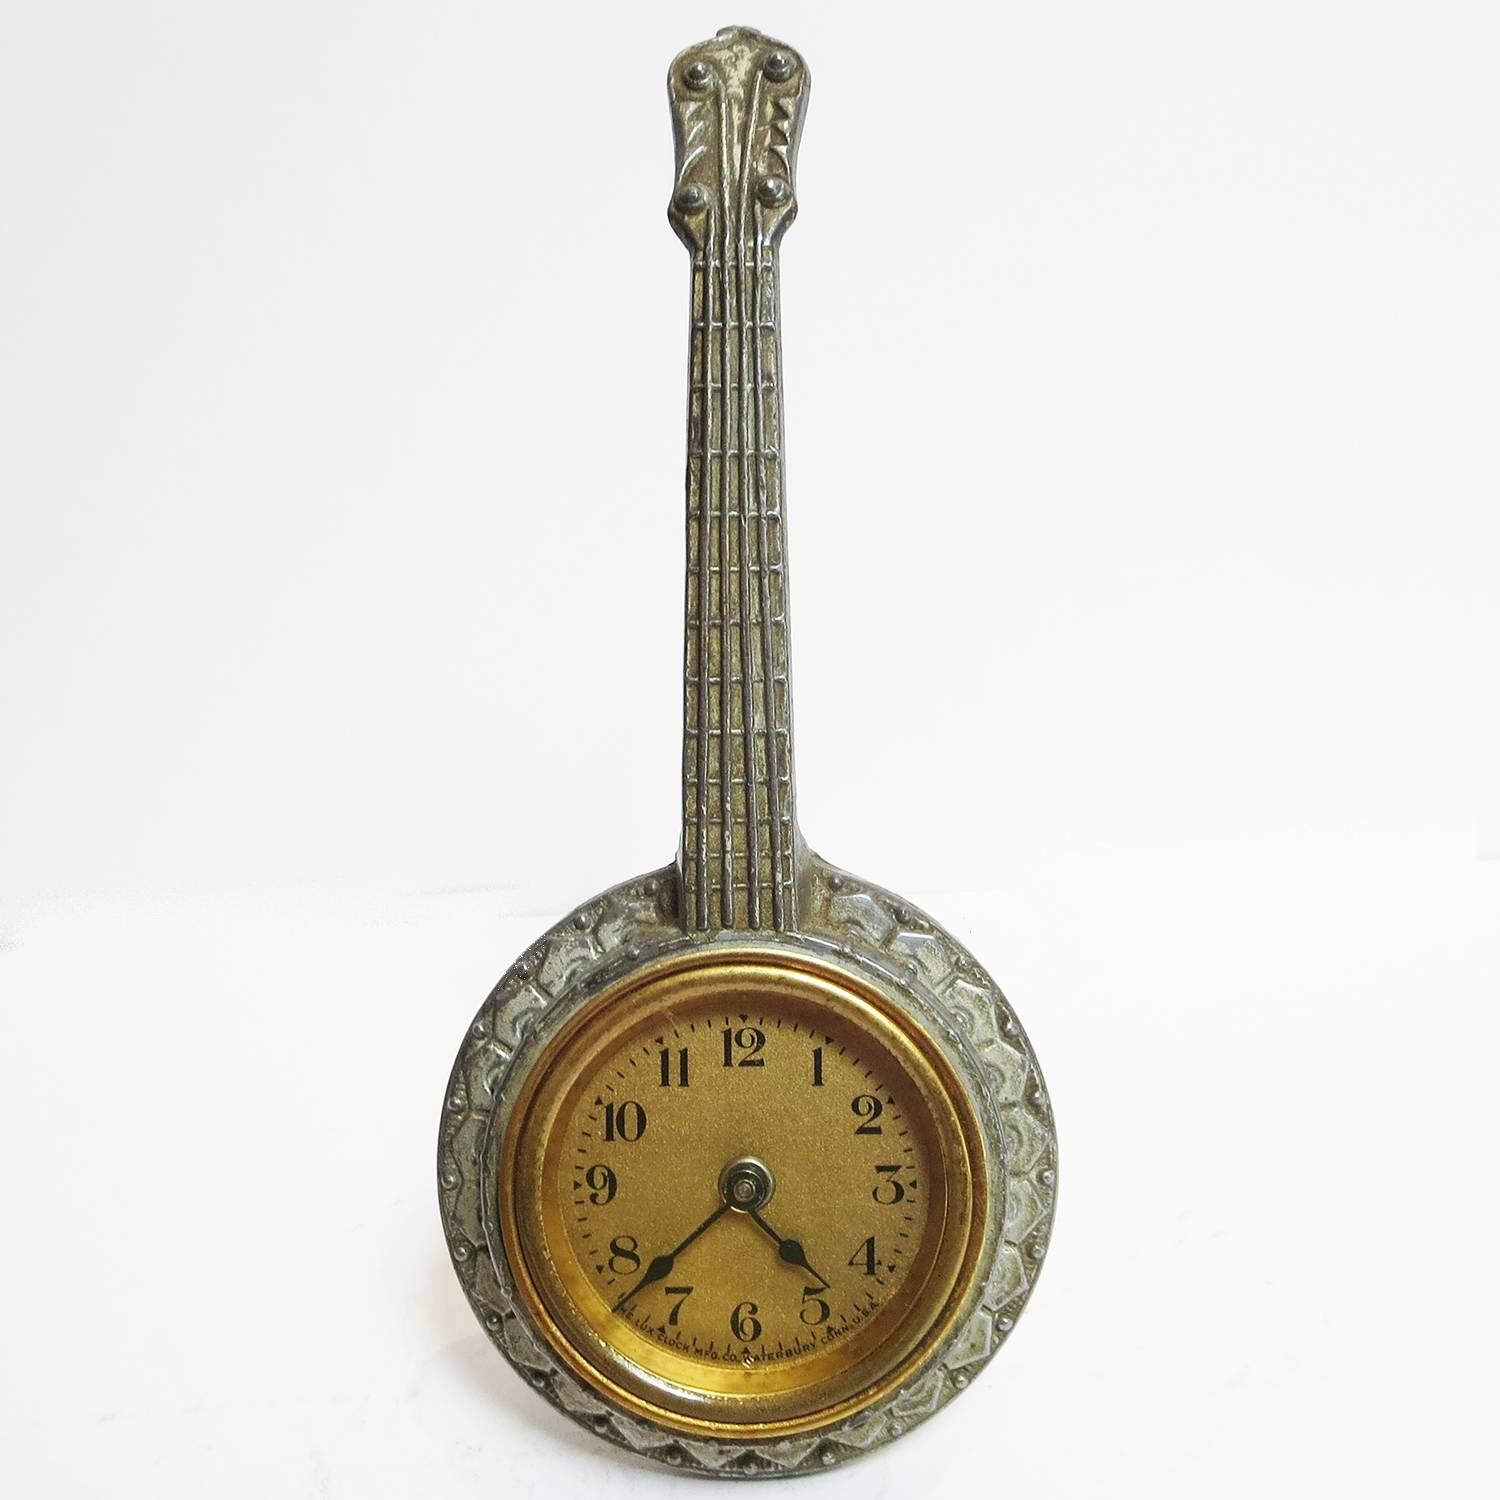 A super charming banjo clock in a cast metal body. The clock is a wind up watch style, and works great. The clock is made by the Lux Clock Mfg. Co. of Waterbury Conn., and the body is marked Viking E W N. Y. The painted finish shows overall wear of